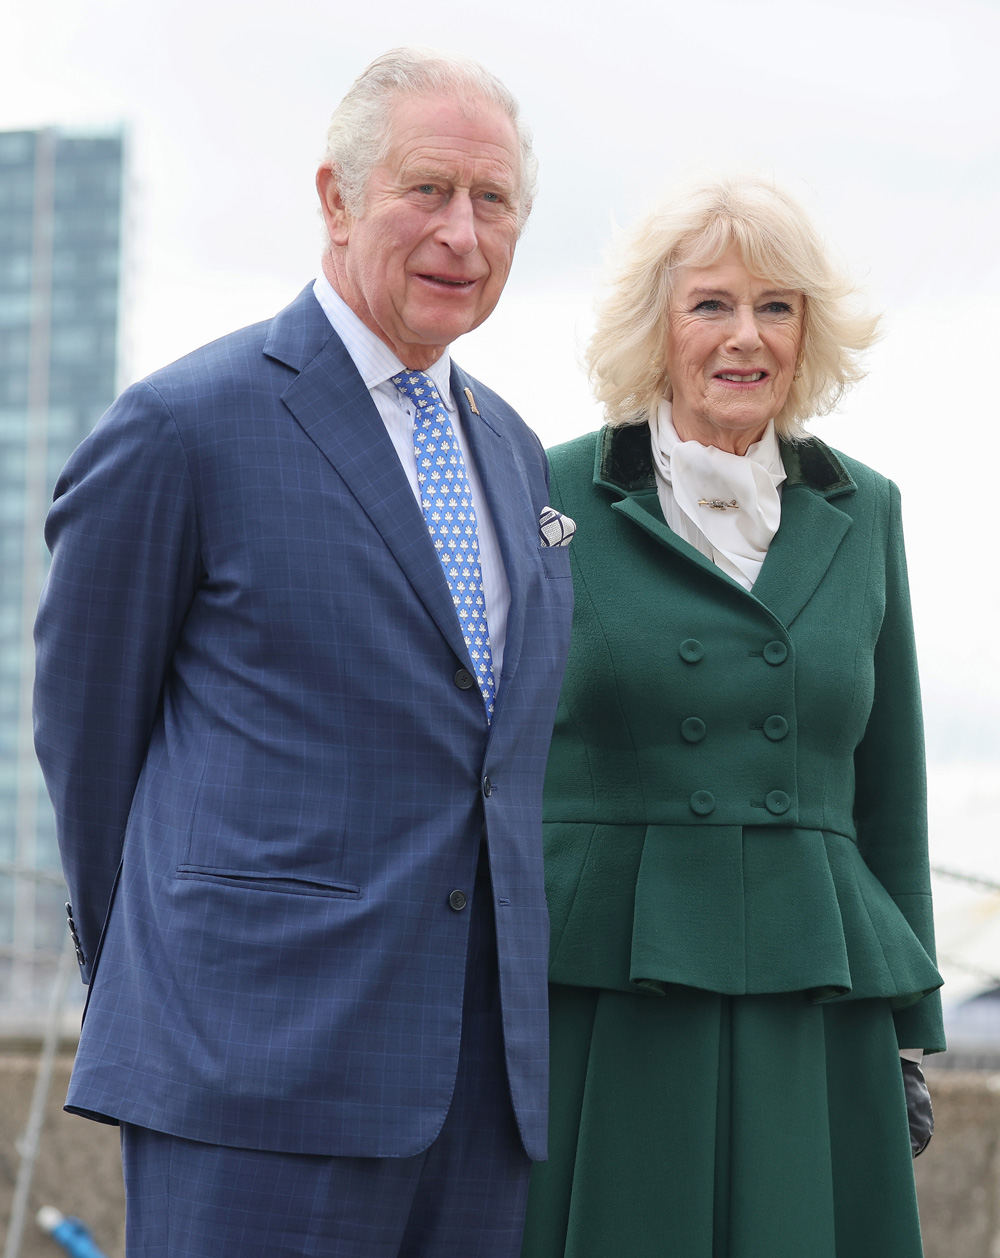 Prince Charles and Camilla Duchess of Cornwall arrive for their visit to The Prince's Foundation training site for arts and culture
Royal visit to The Prince's Foundation, Trinity Buoy Wharf, London, UK - 03 Feb 2022